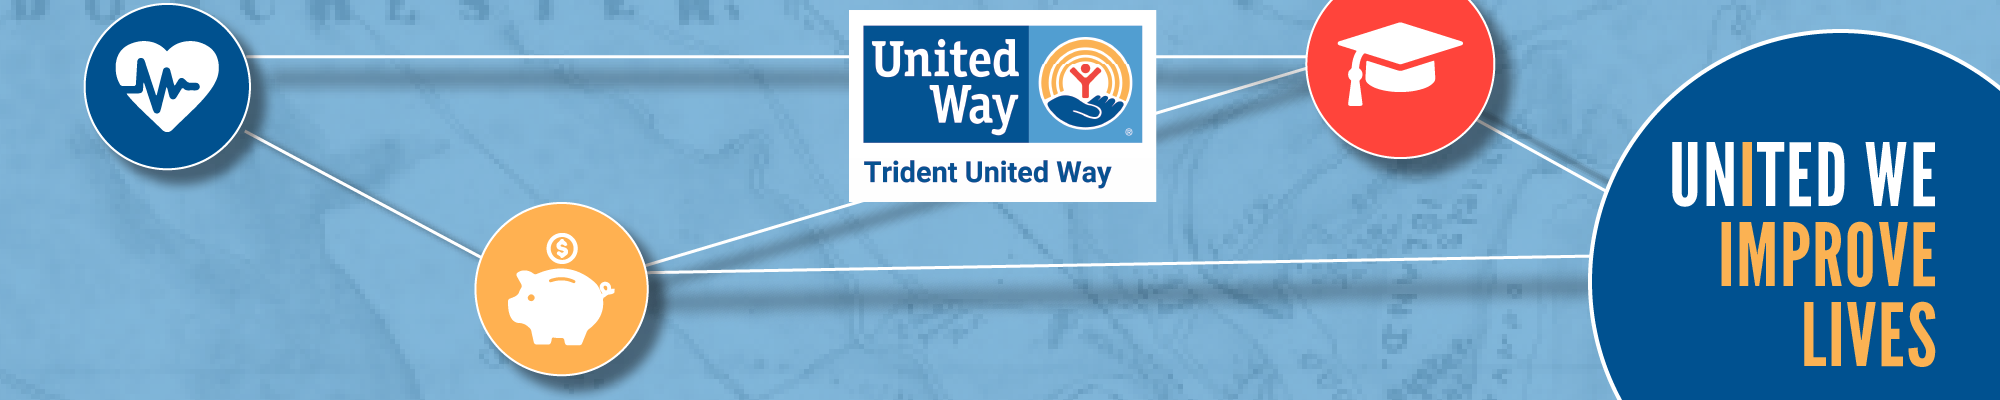 Icons representing education, financial stability and health along with the Trident United Way logo with a line connecting one to another showing they are all conencted. A circle with the words United We Improve Lives.